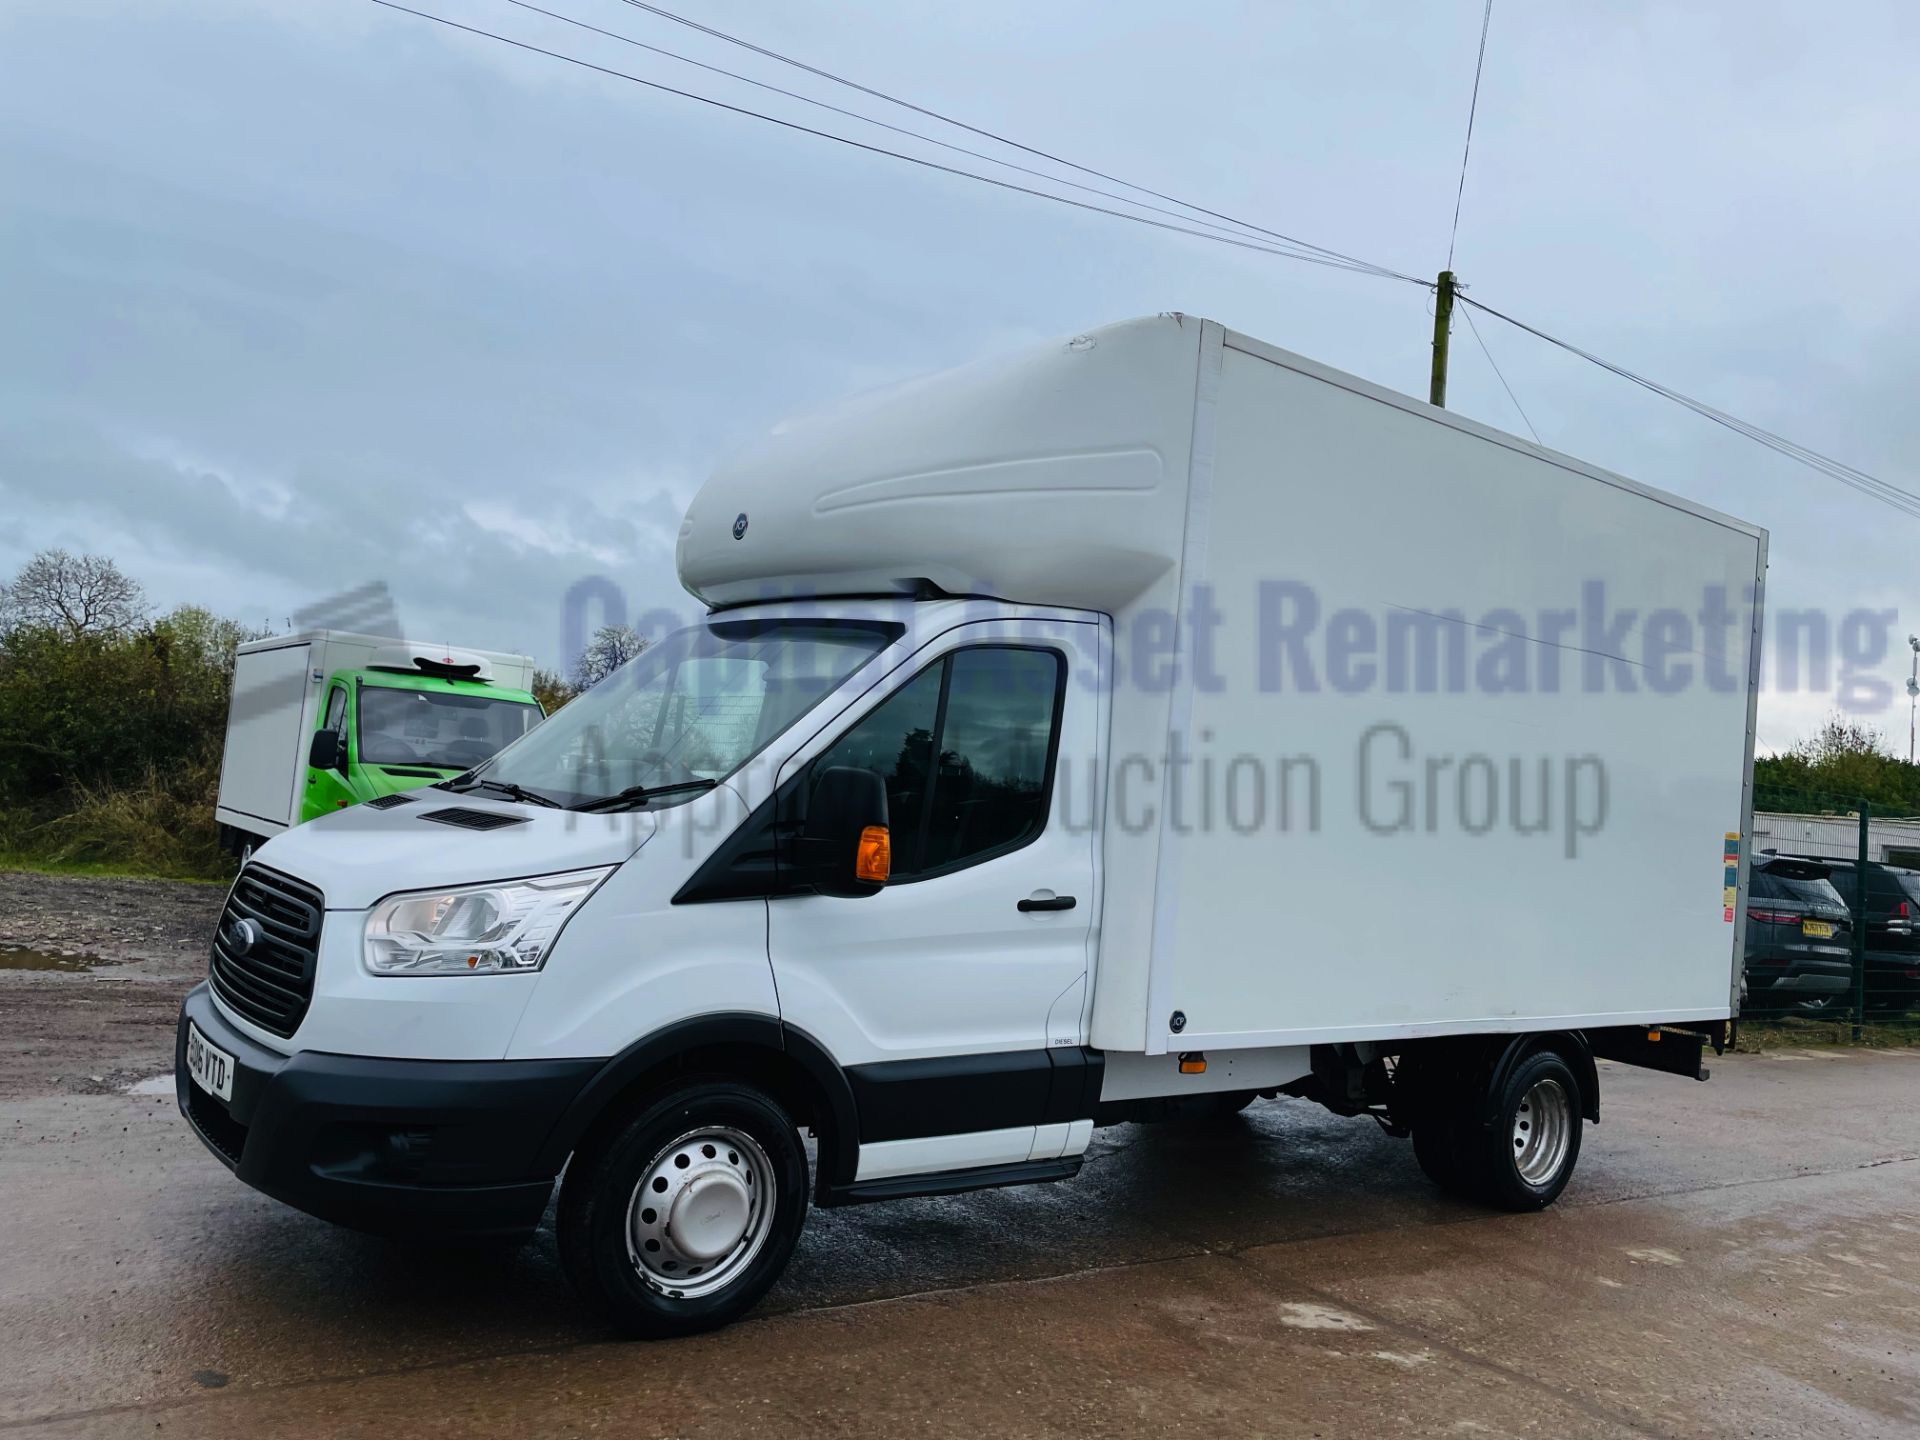 (On Sale) FORD TRANSIT 125 T350 *LWB - LUTON VAN* (2016) '2.2 TDCI - 6 SPEED' *TAIL-LIFT* (1 OWNER) - Image 7 of 45